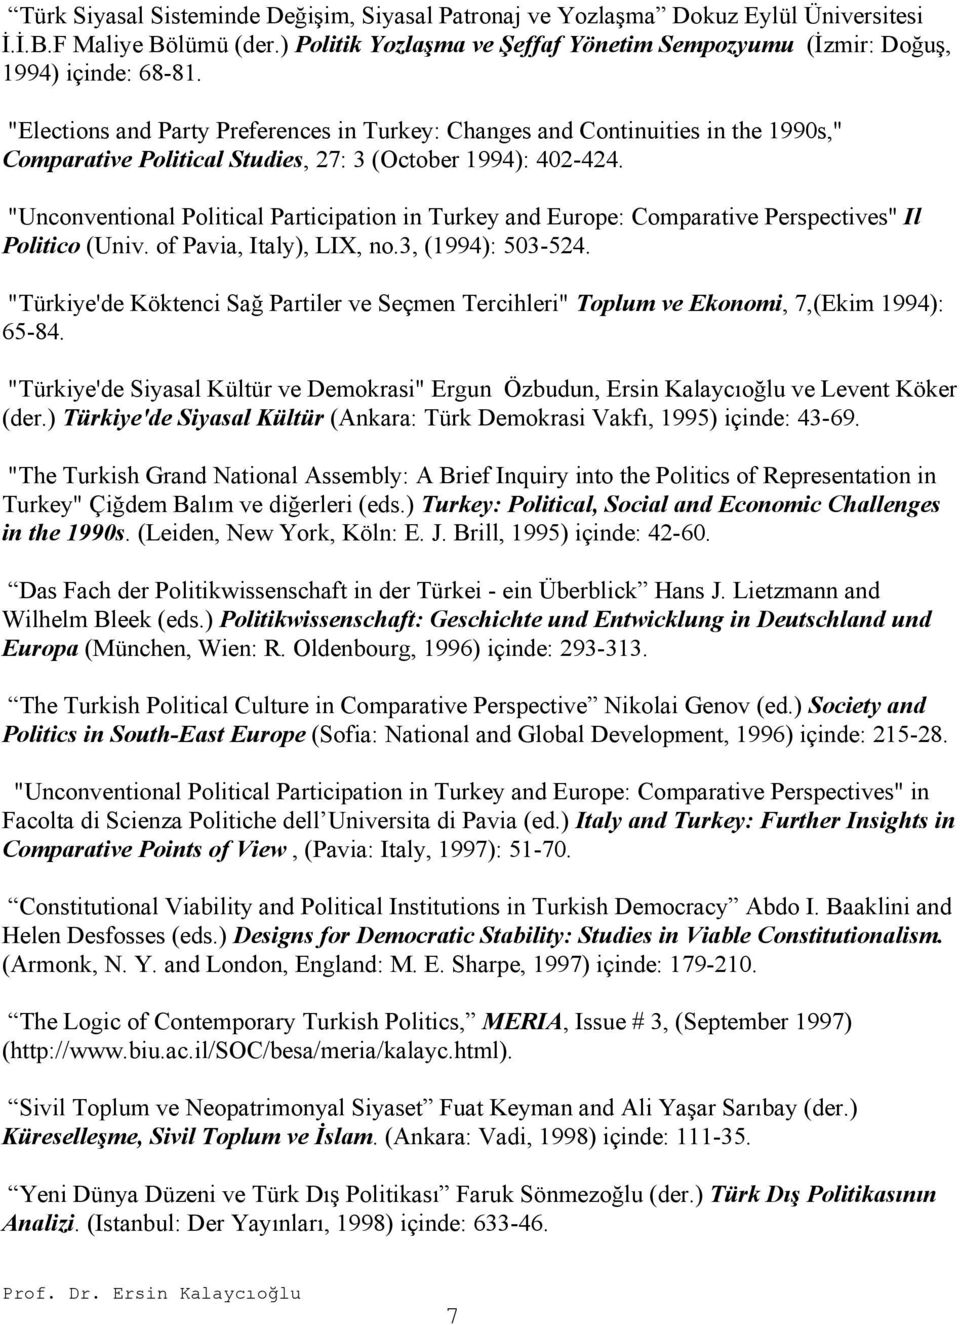 "Unconventional Political Participation in Turkey and Europe: Comparative Perspectives" Il Politico (Univ. of Pavia, Italy), LIX, no.3, (1994): 503-524.